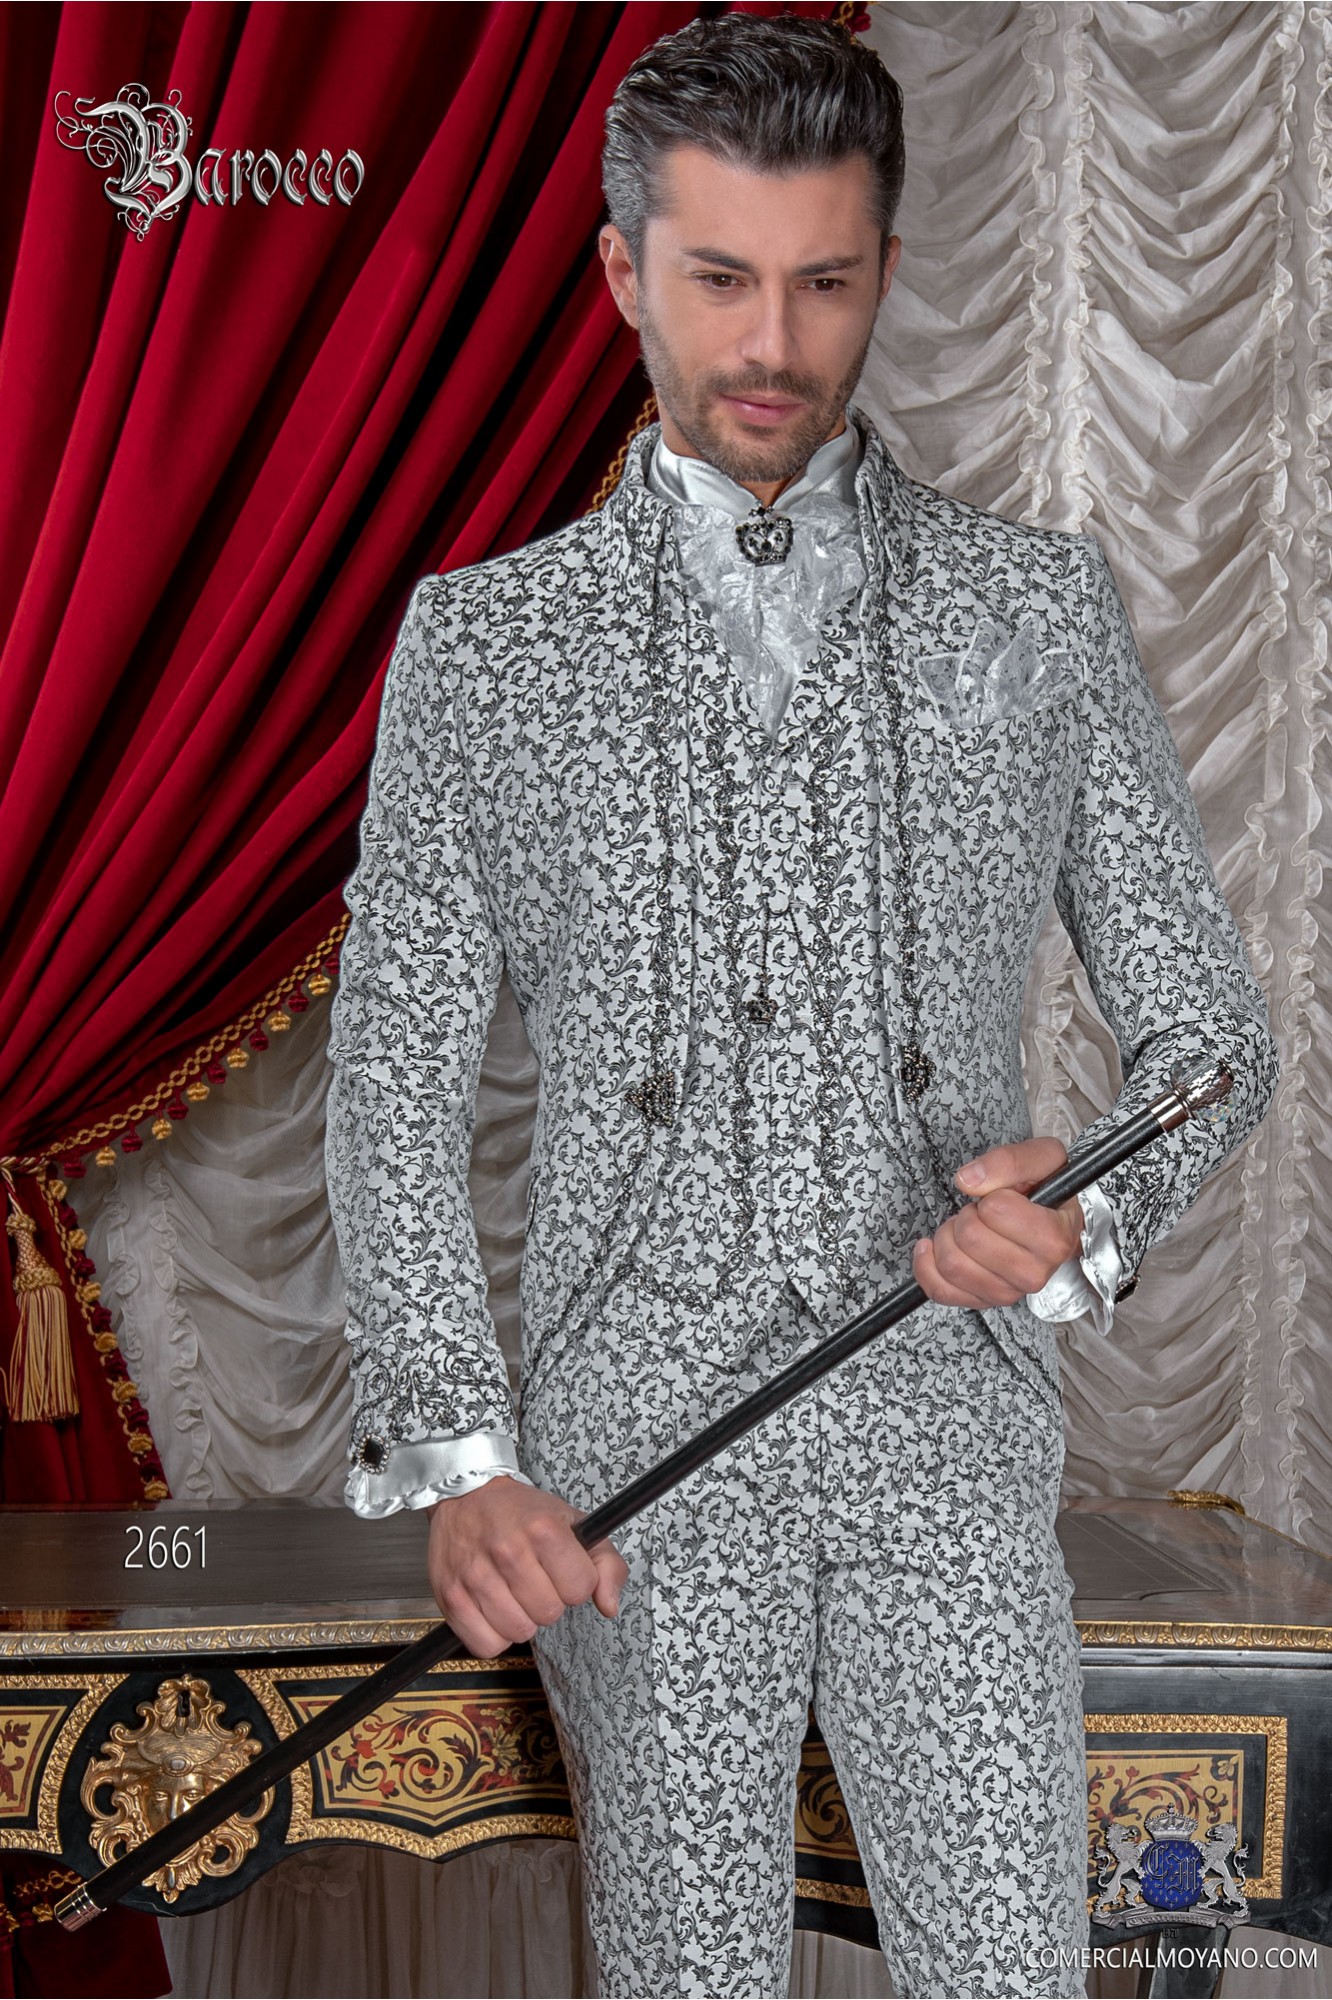 Baroque groom suit, vintage Napoleon collar frock coat in white and black jacquard fabric with black embroidery model 2661 Mario Moyano